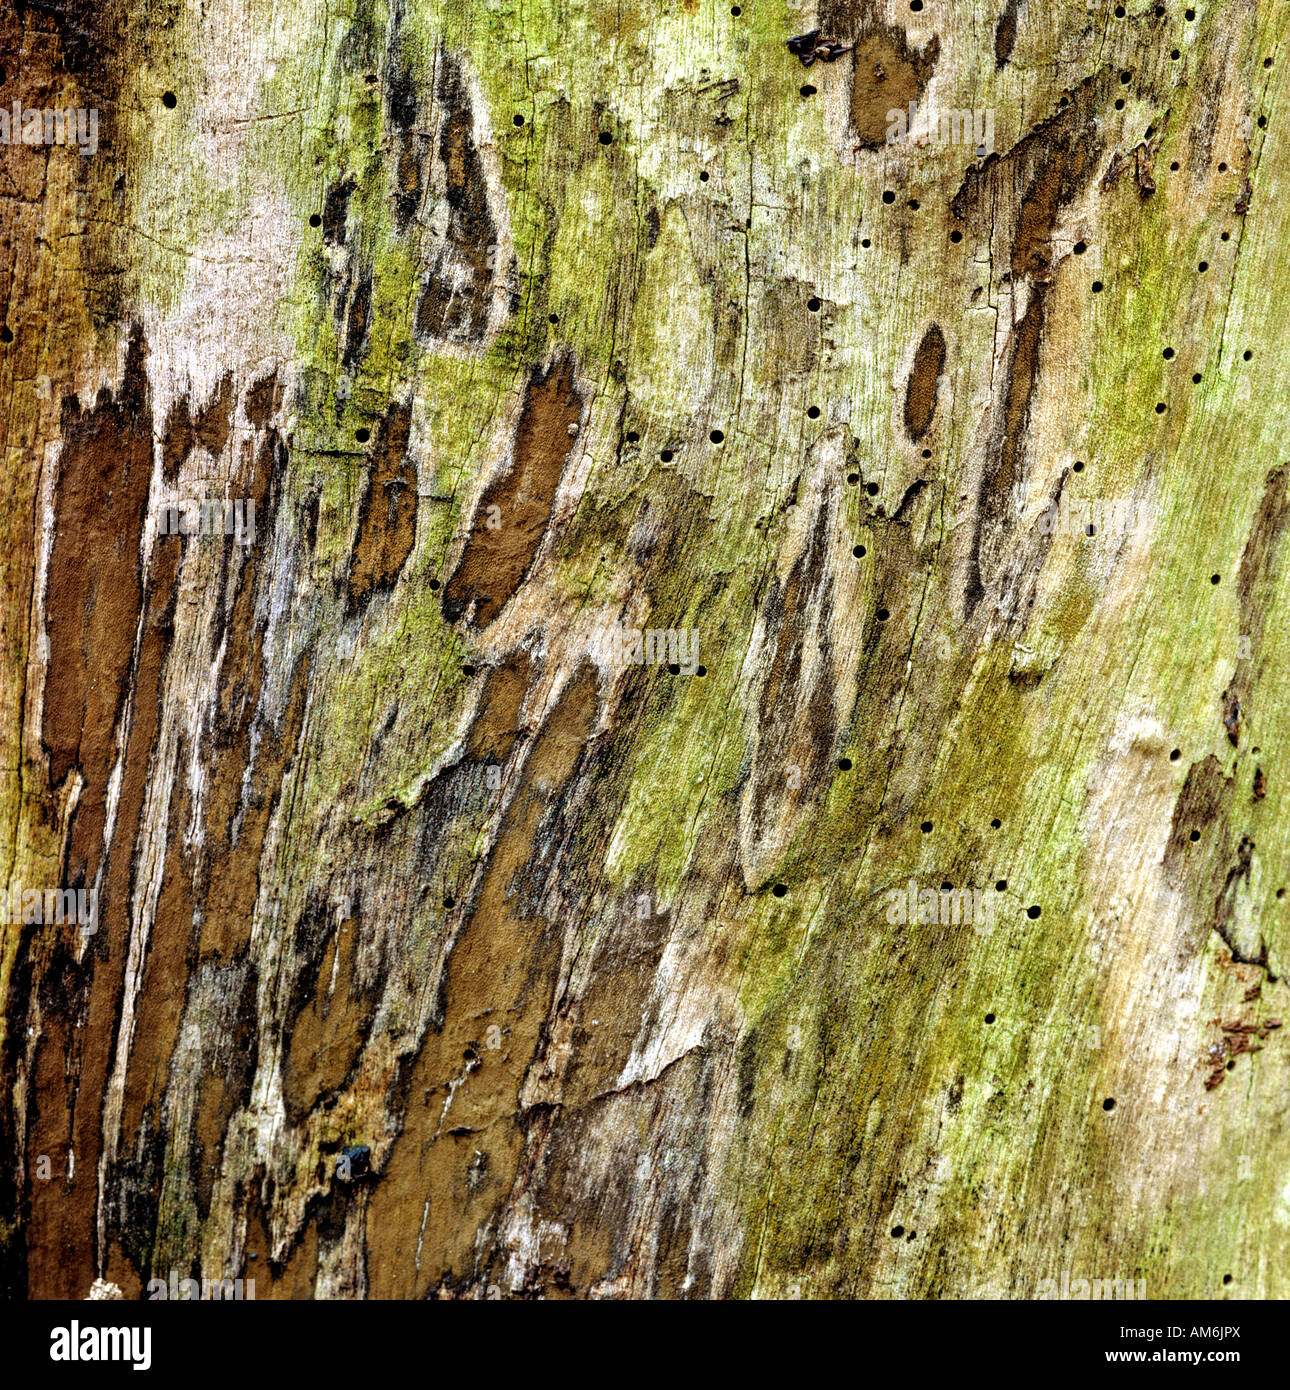 Wooden structure of a tree trunk Stock Photo